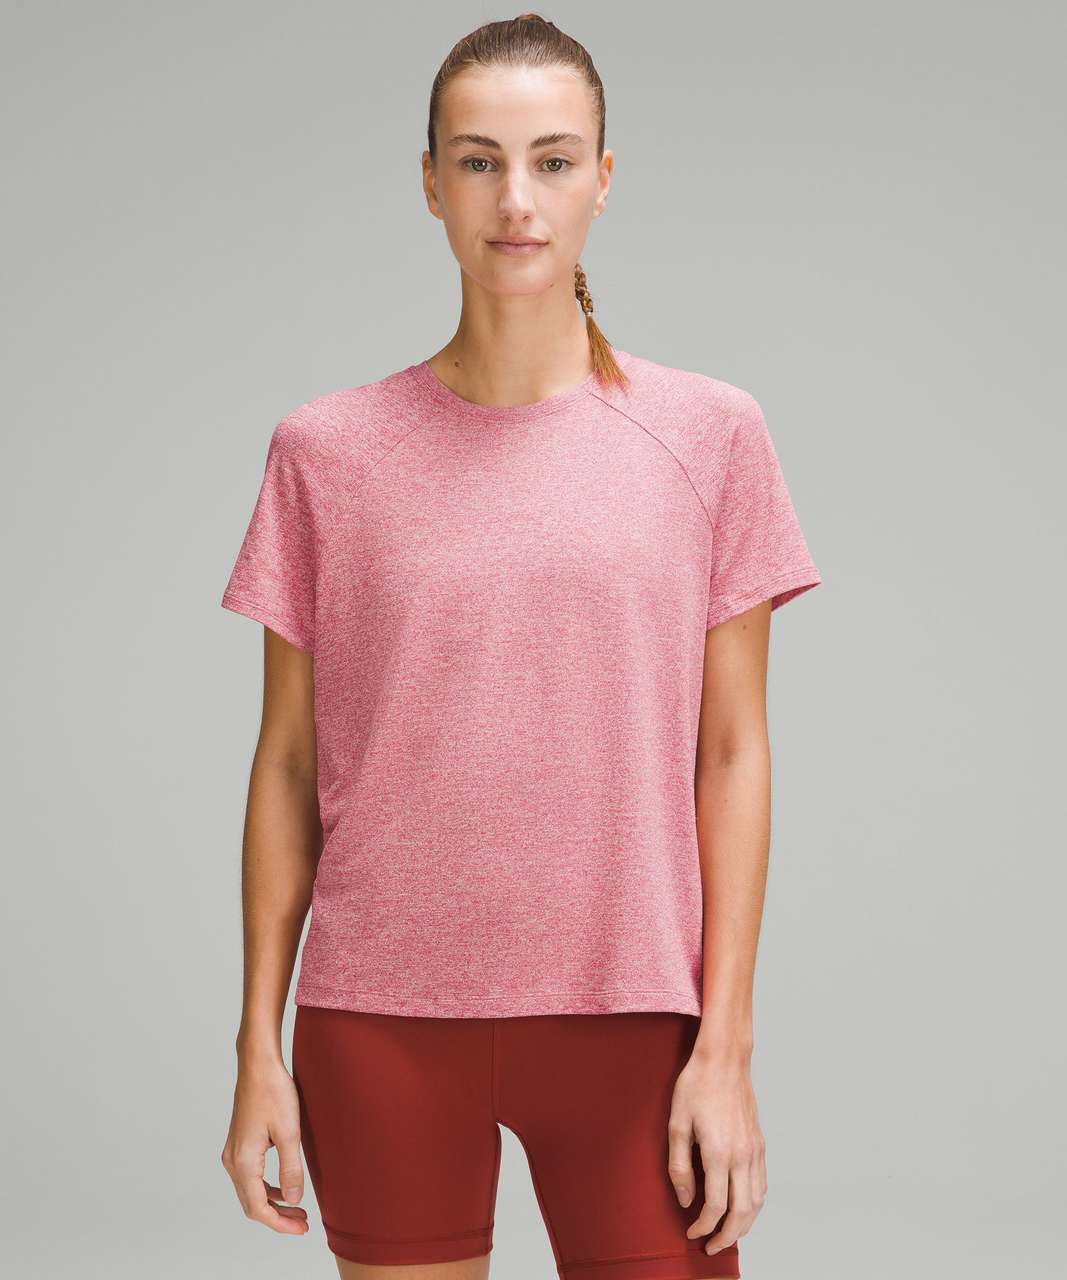 Lululemon License to Train Classic-Fit T-Shirt - Heathered Vintage Rose